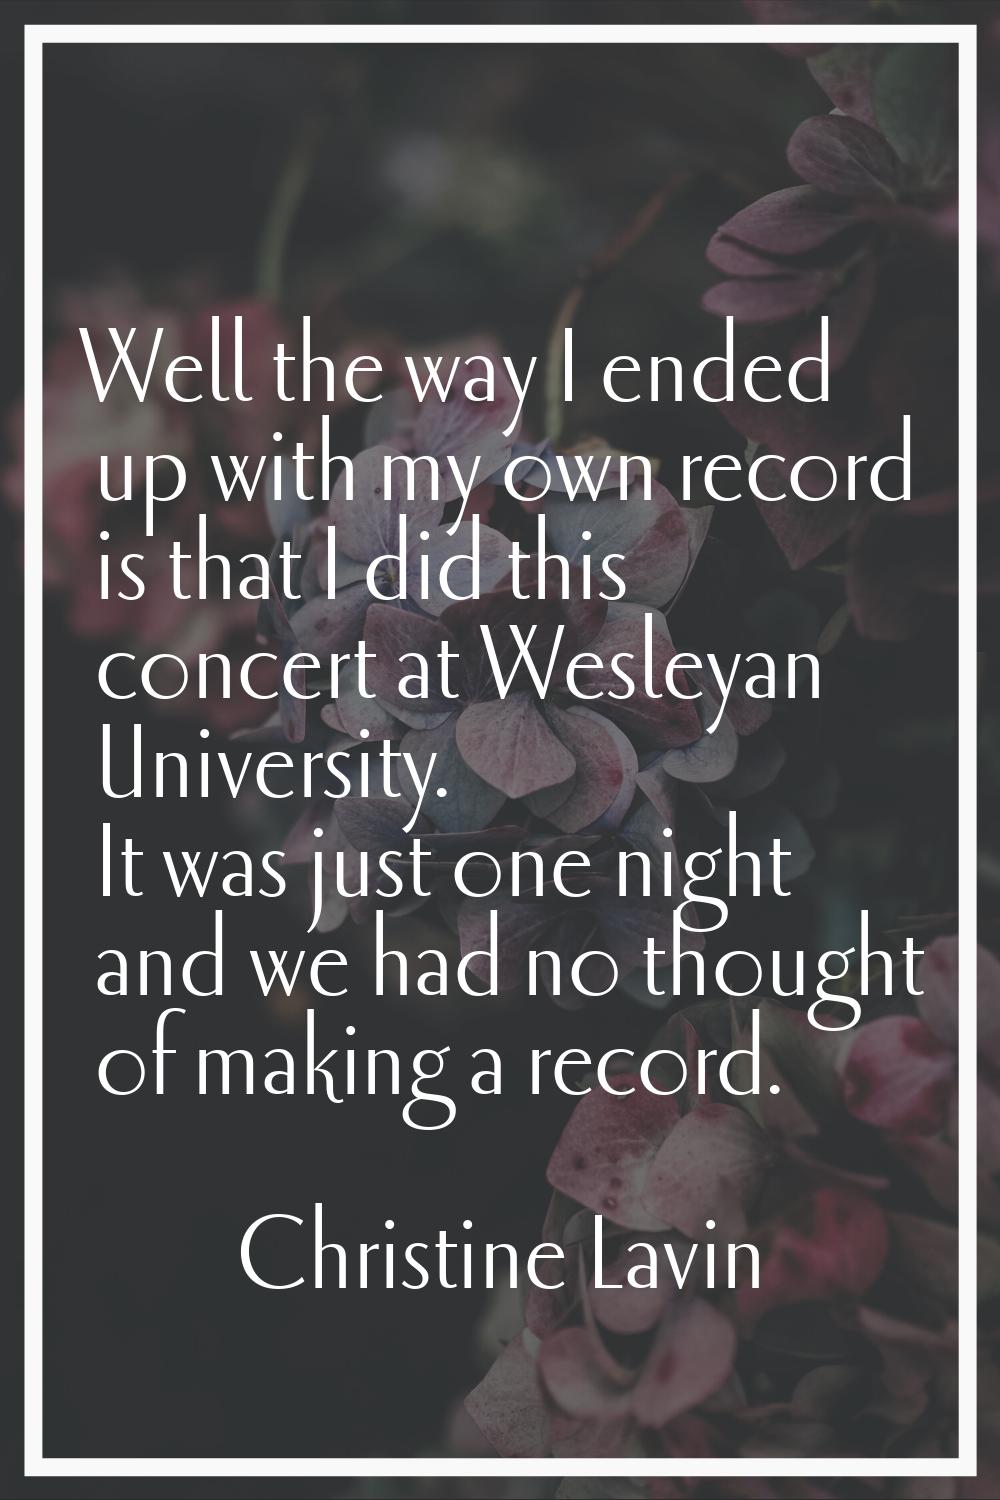 Well the way I ended up with my own record is that I did this concert at Wesleyan University. It wa